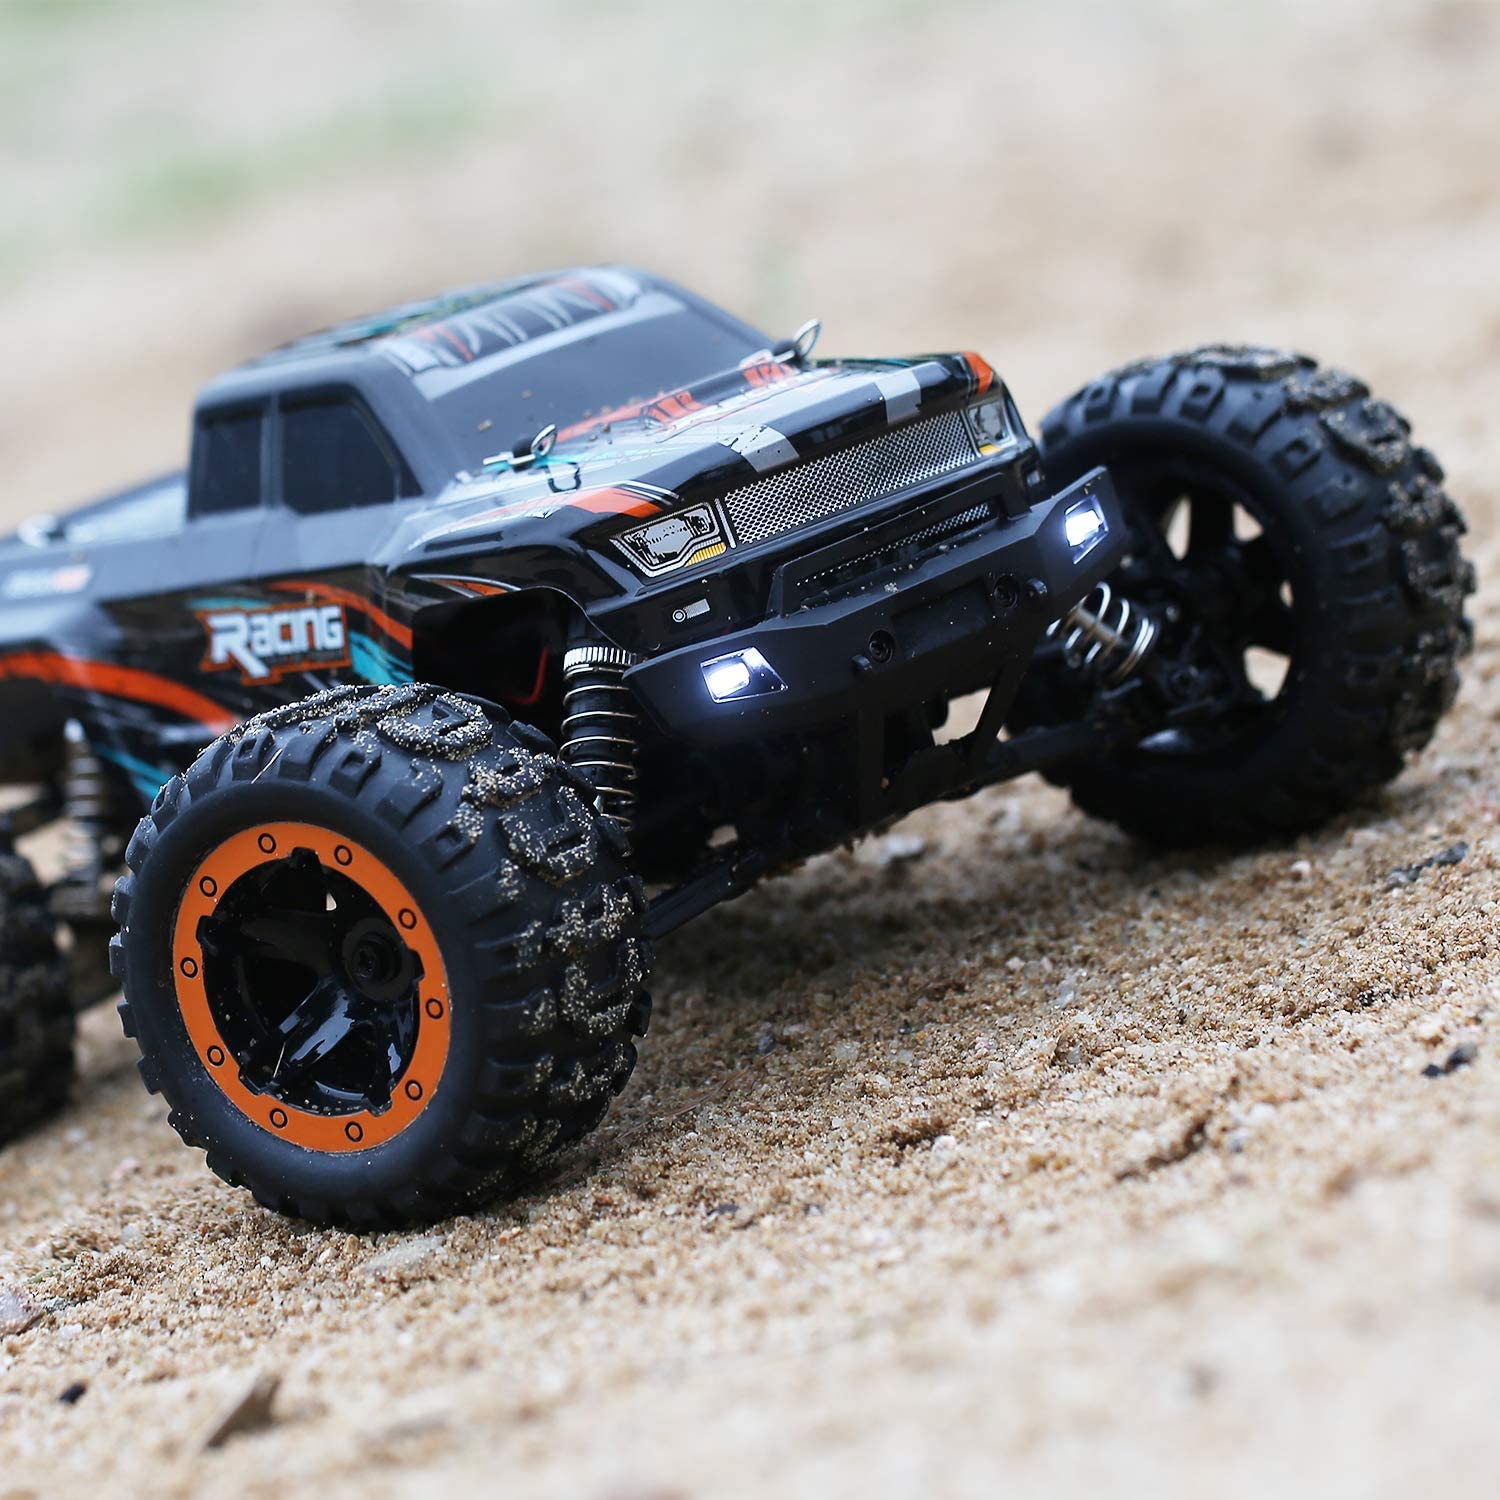 DEERC Car High Speed Remote Control Car 4WD Off Road Truck Vehicle 1:18 Scale 30+ MPH for Adults Gifts for Kids Play Outdoor 2 Batteries